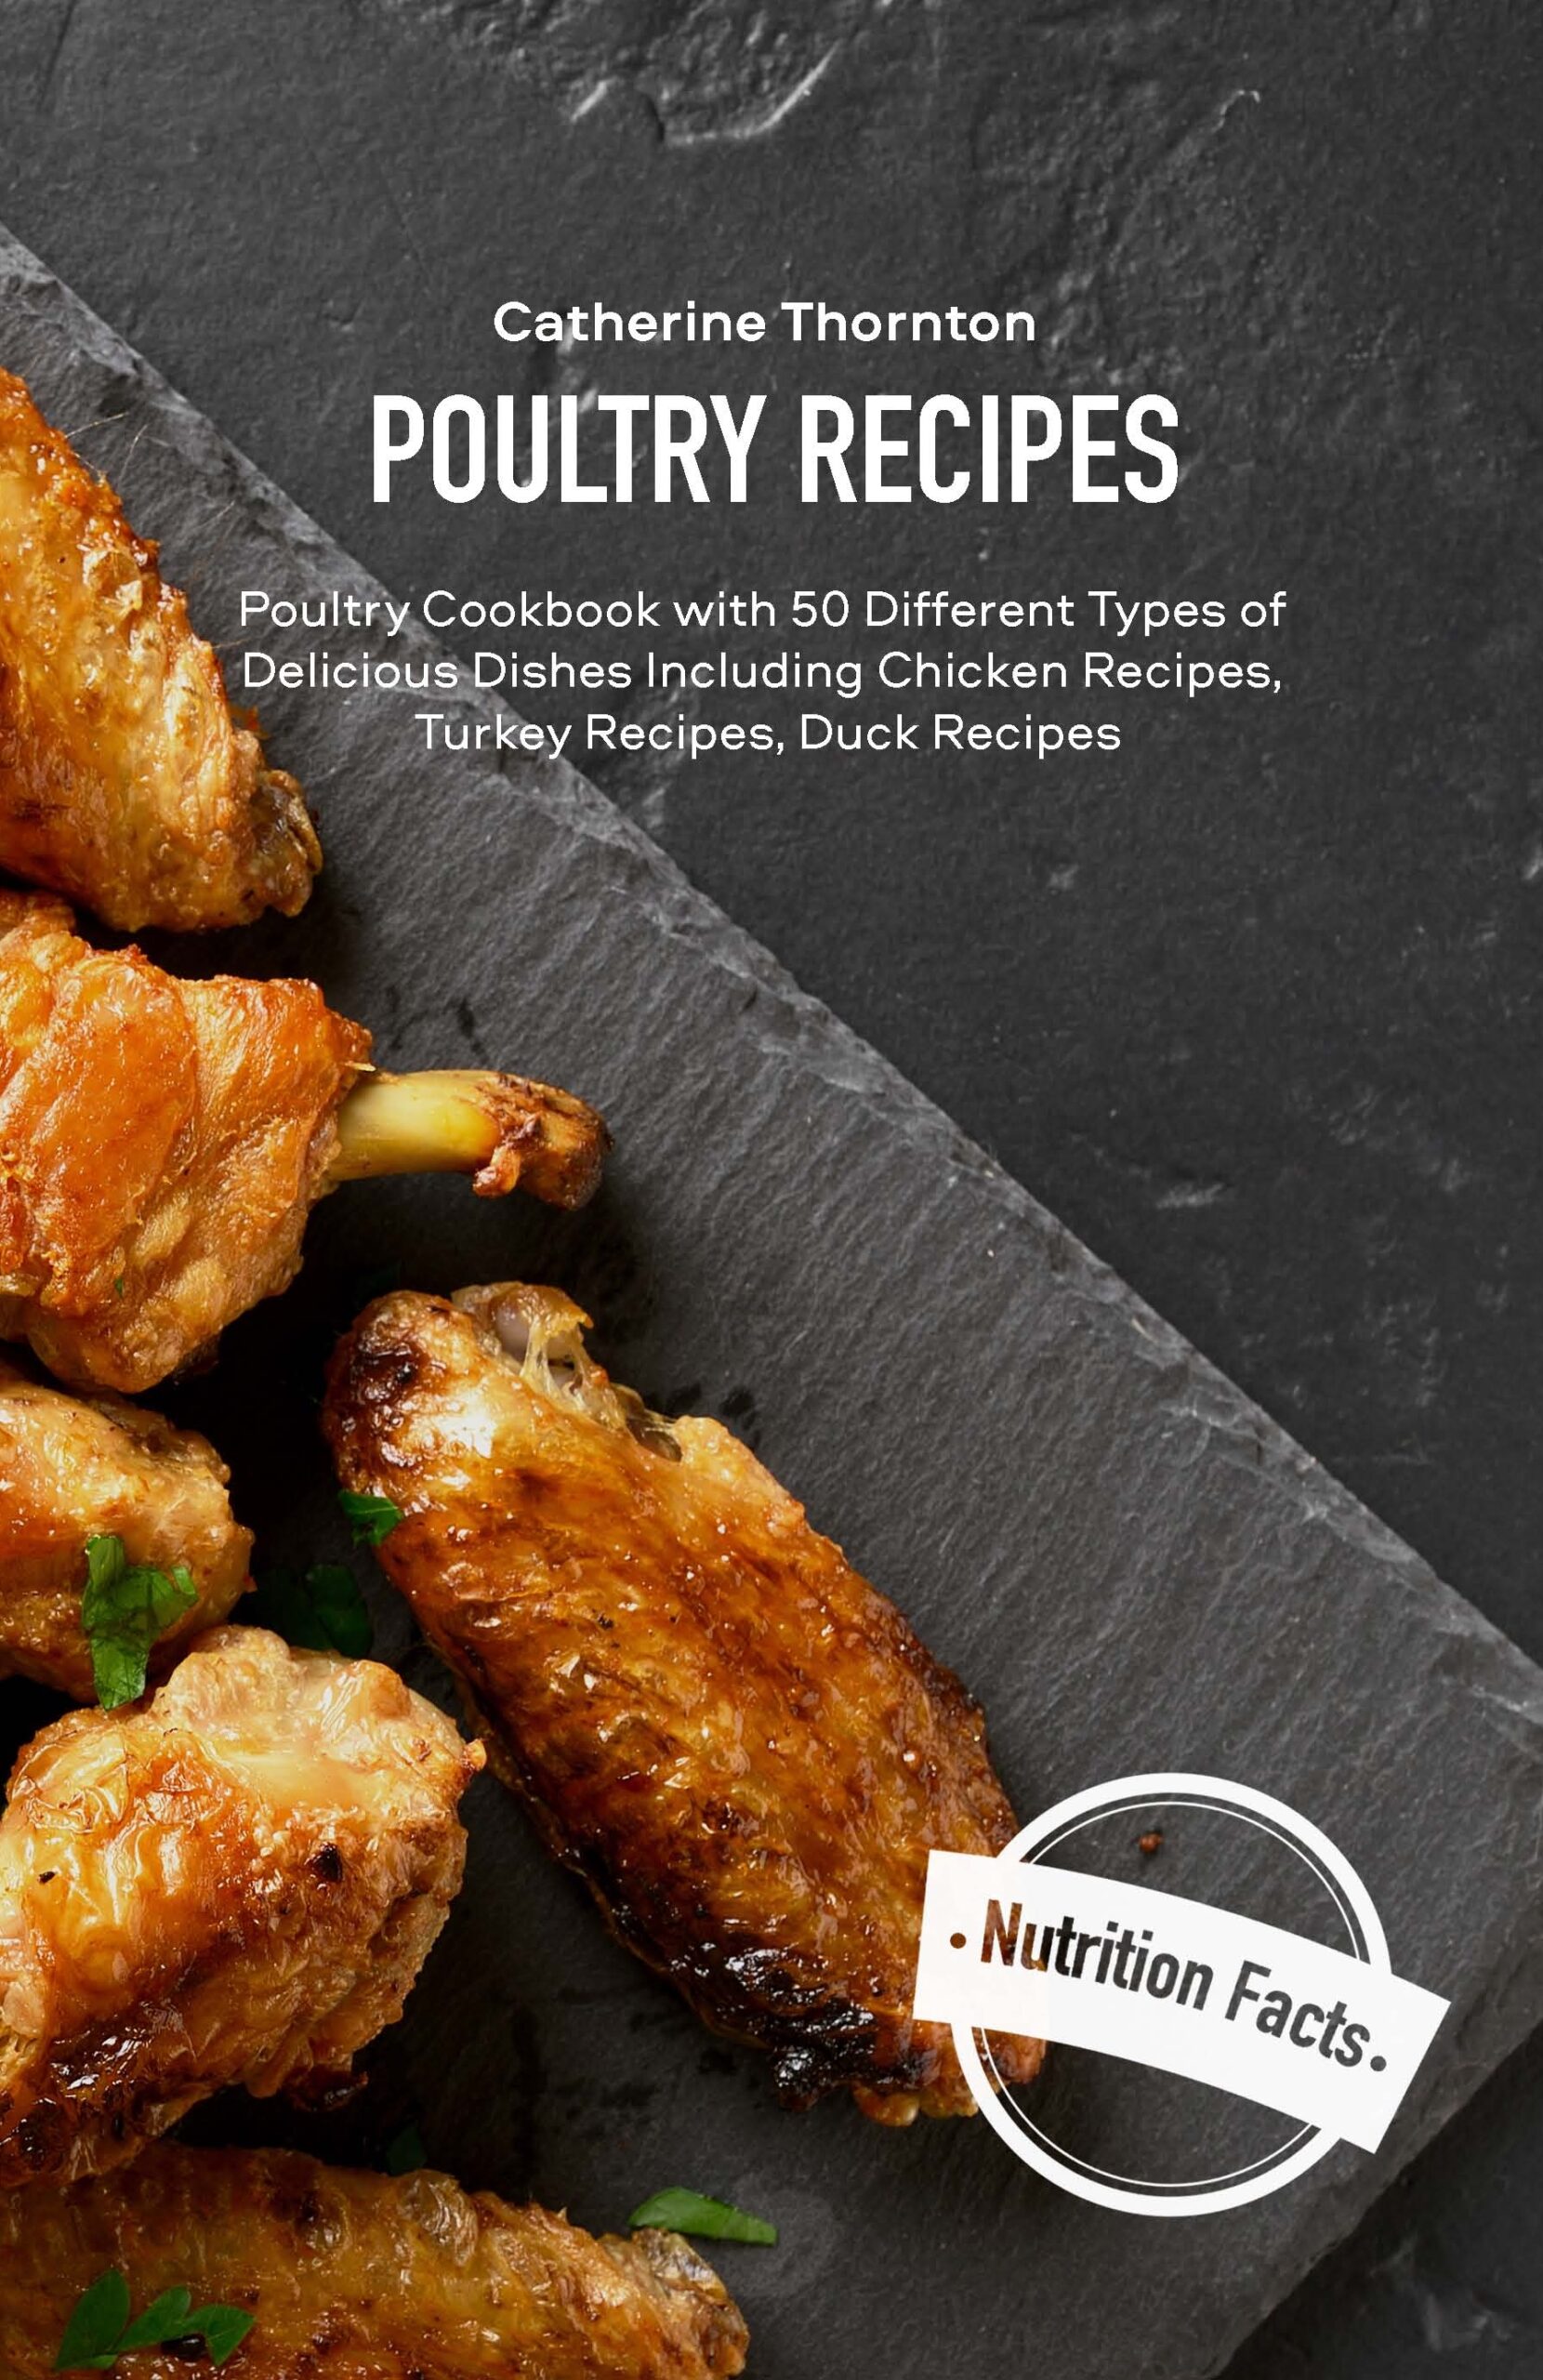 FREE: Poultry Recipes: Poultry Cookbook with 50 Different Types of Delicious Dishes Including Chicken Recipes, Turkey Recipes, Duck Recipes by Catherine Thornton